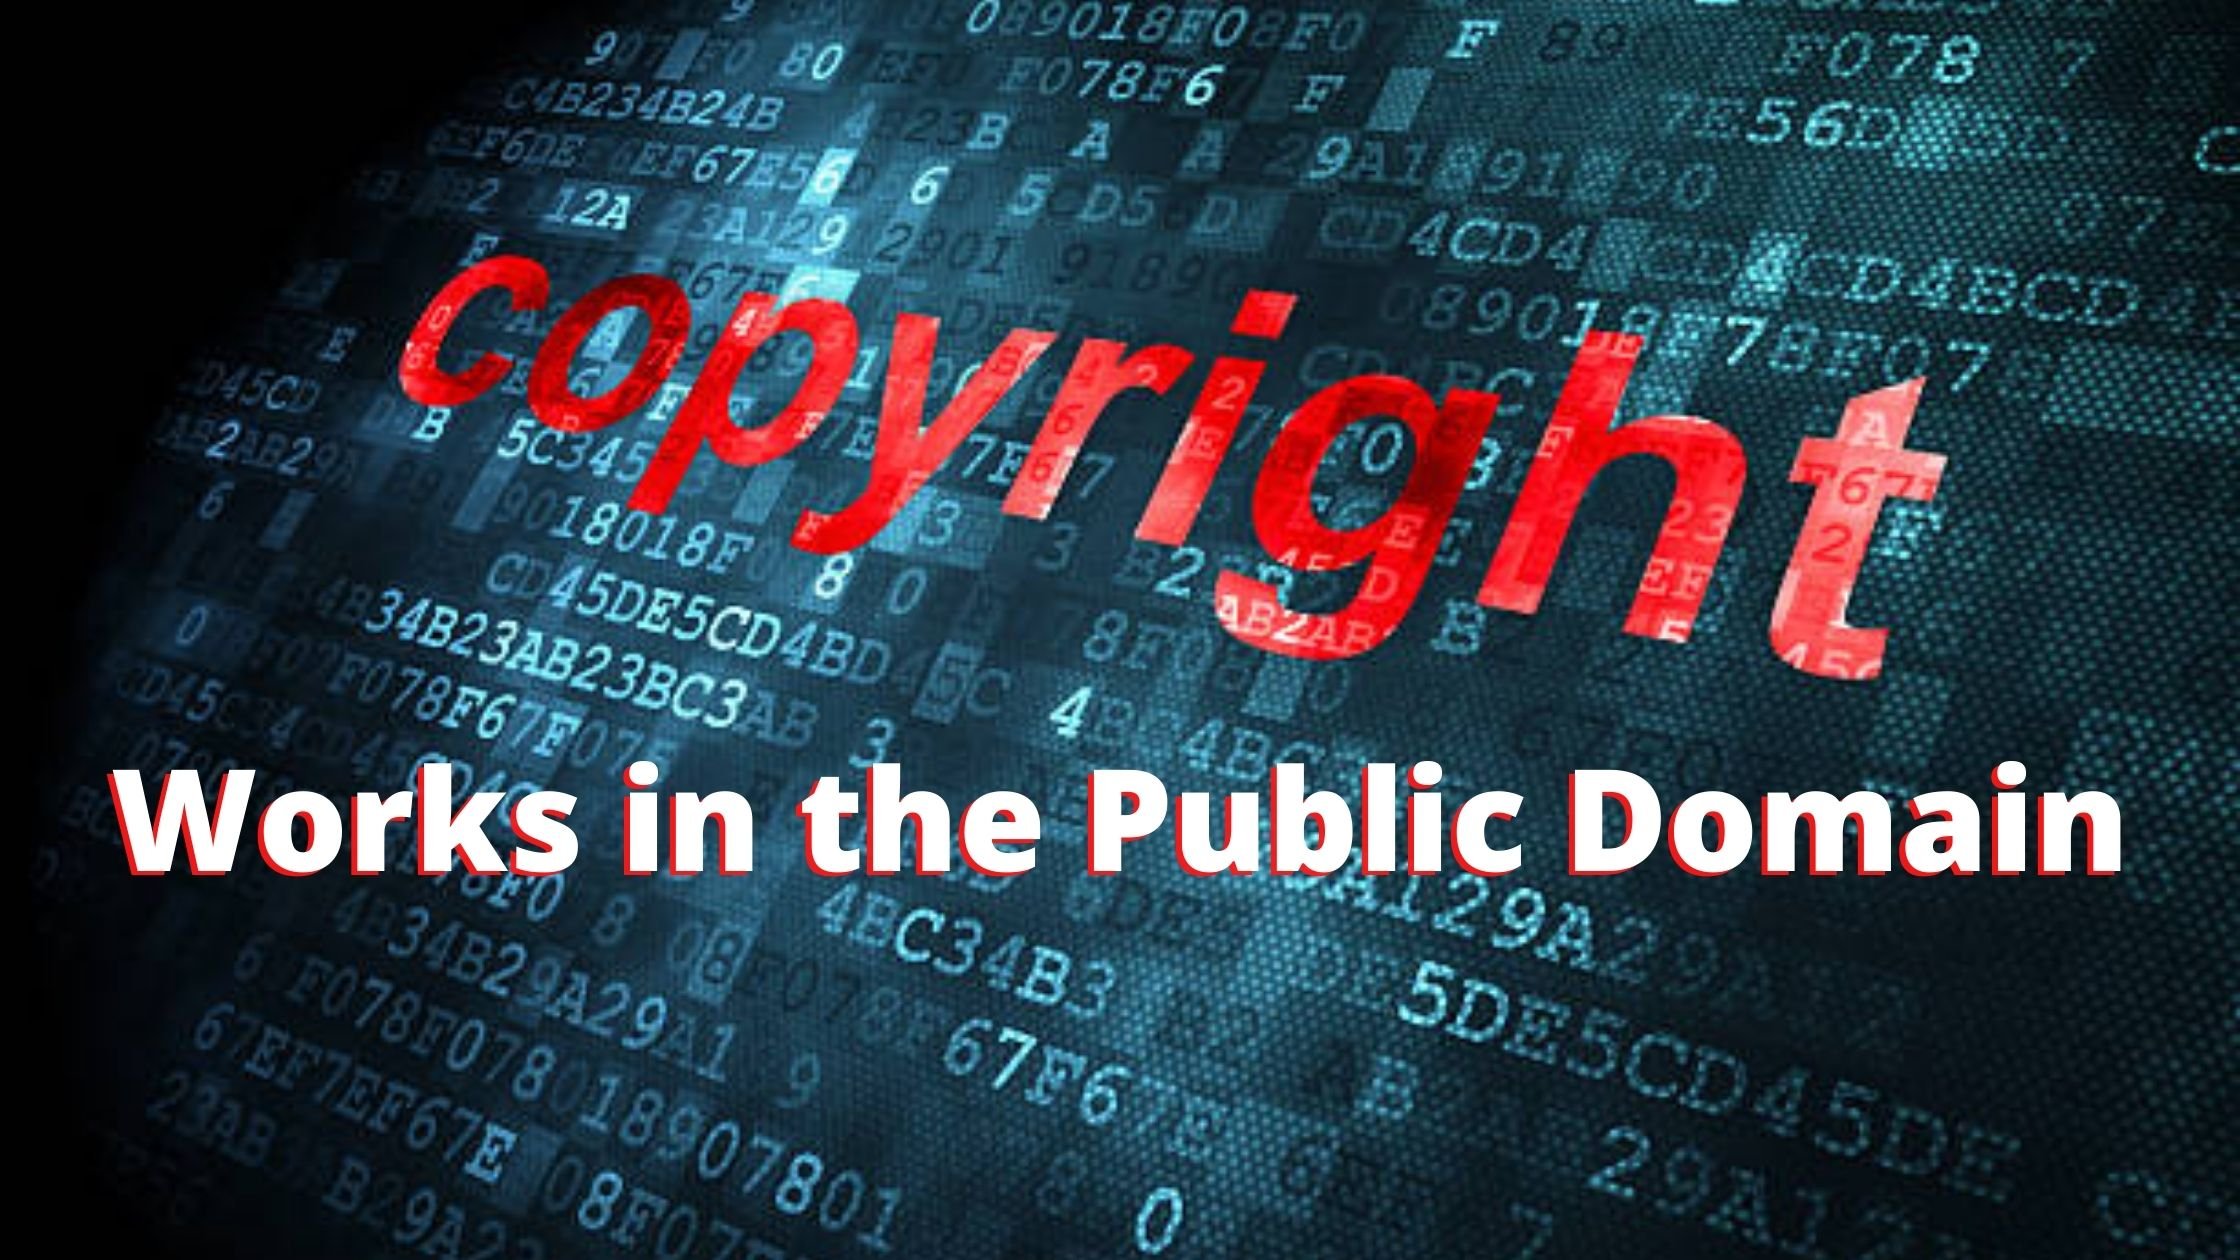 Copyrighted works in the Public Domain